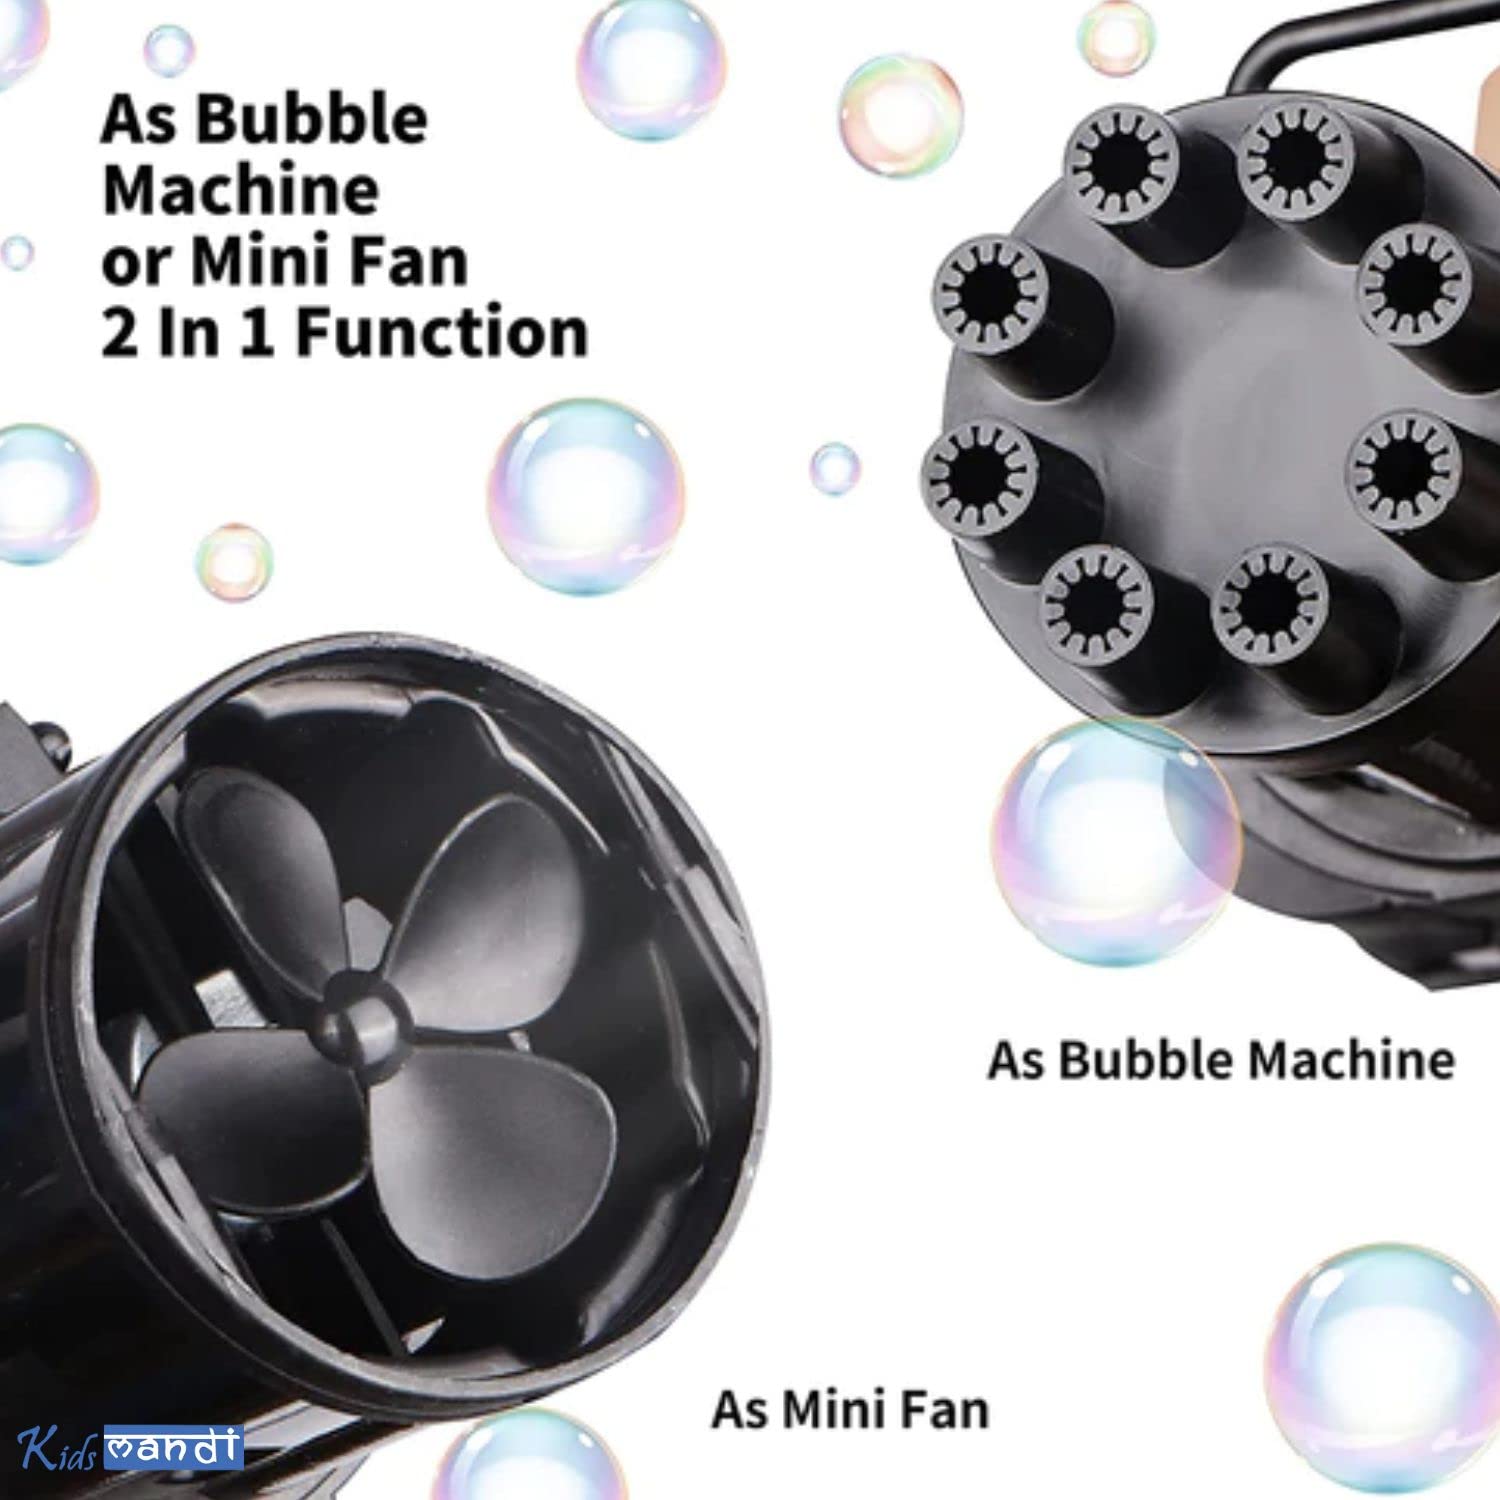 Kids Mandi 8-hole battery-operated bubbles gun floating in air bubbles.